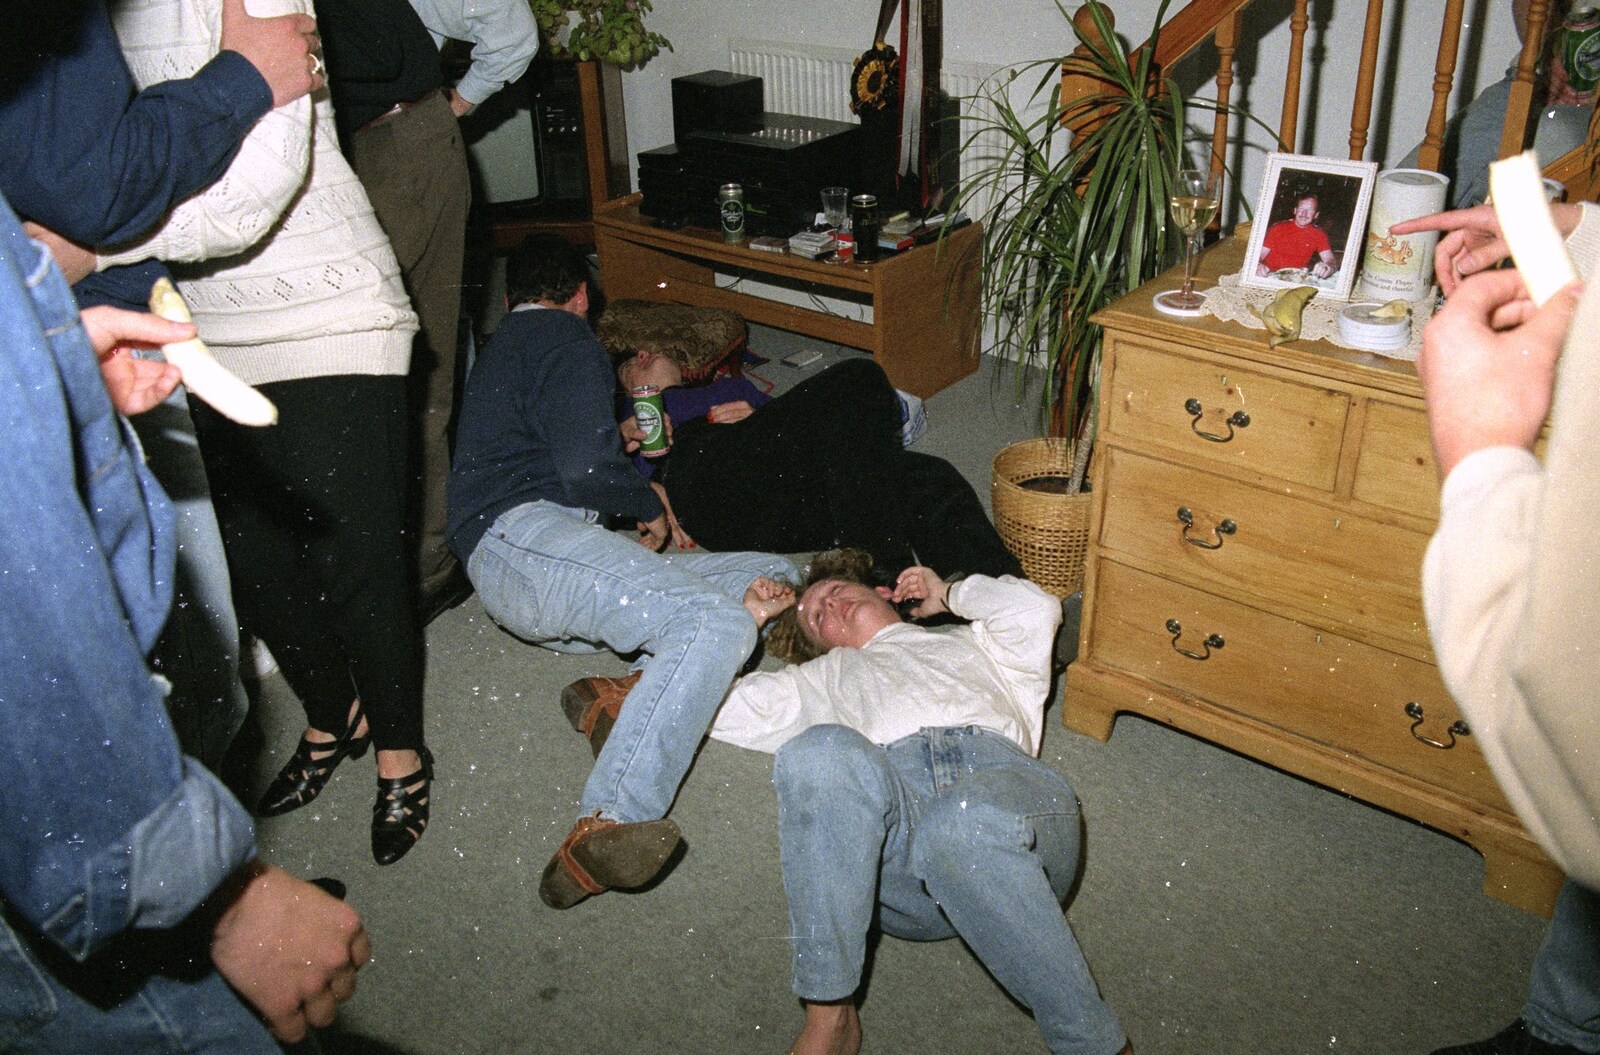 A Party in Clacton and the Stuston Polling Caravan, Suffolk and Essex - 4th May 1991: A pile on the floor